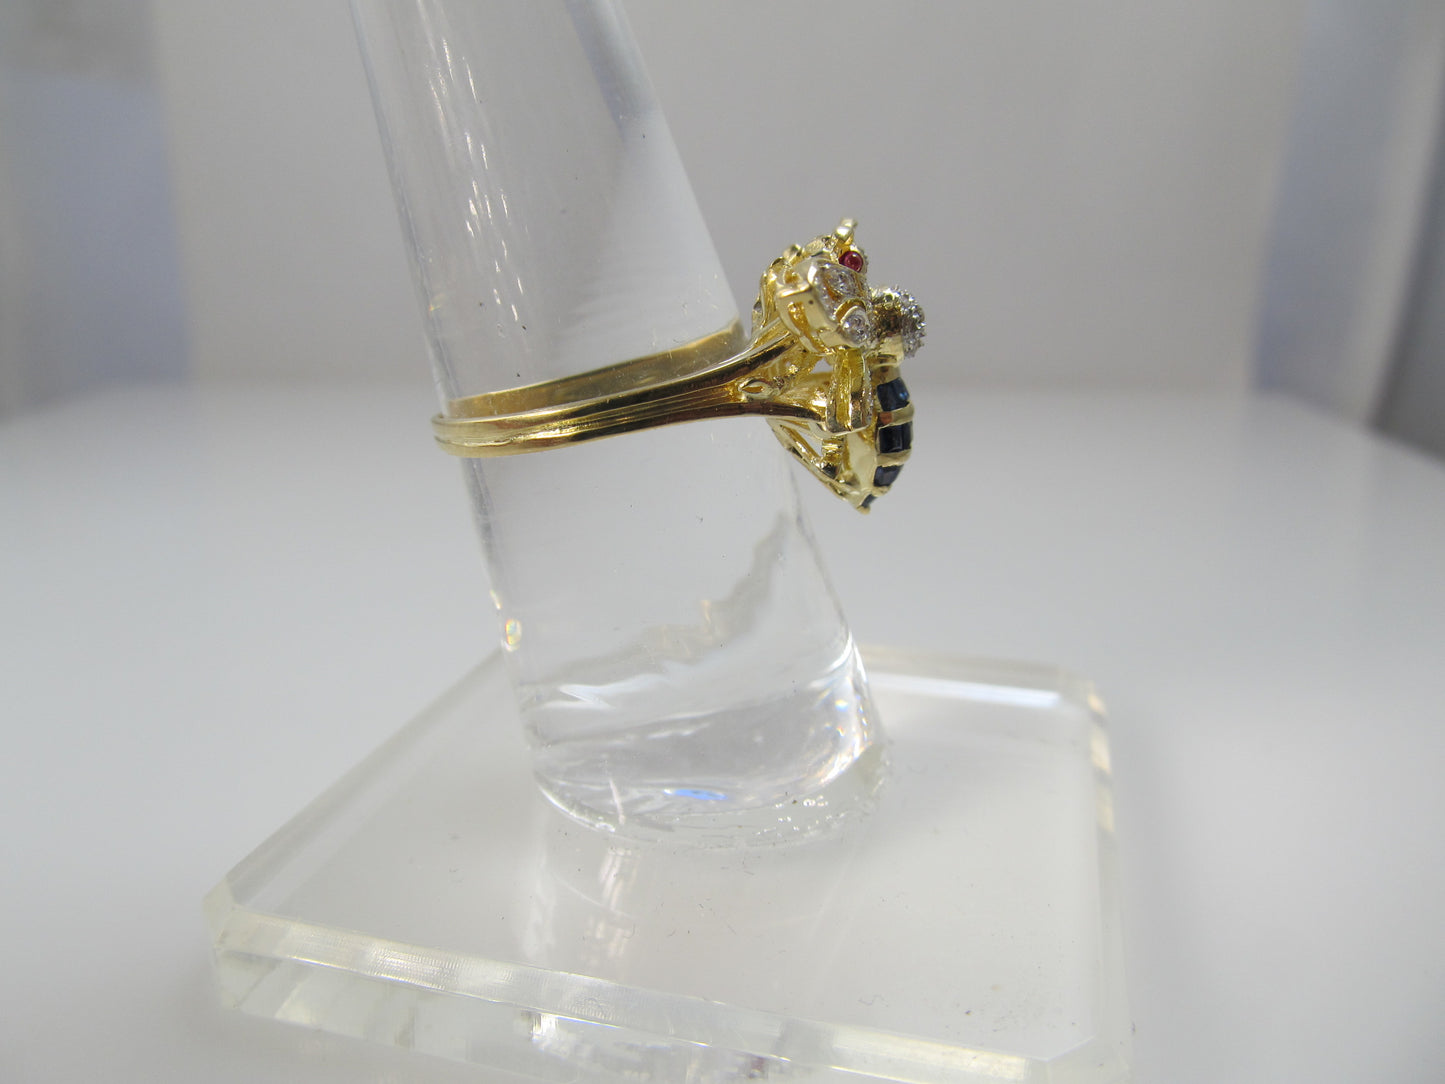 18k gold bee ring with sapphires, diamonds and rubies